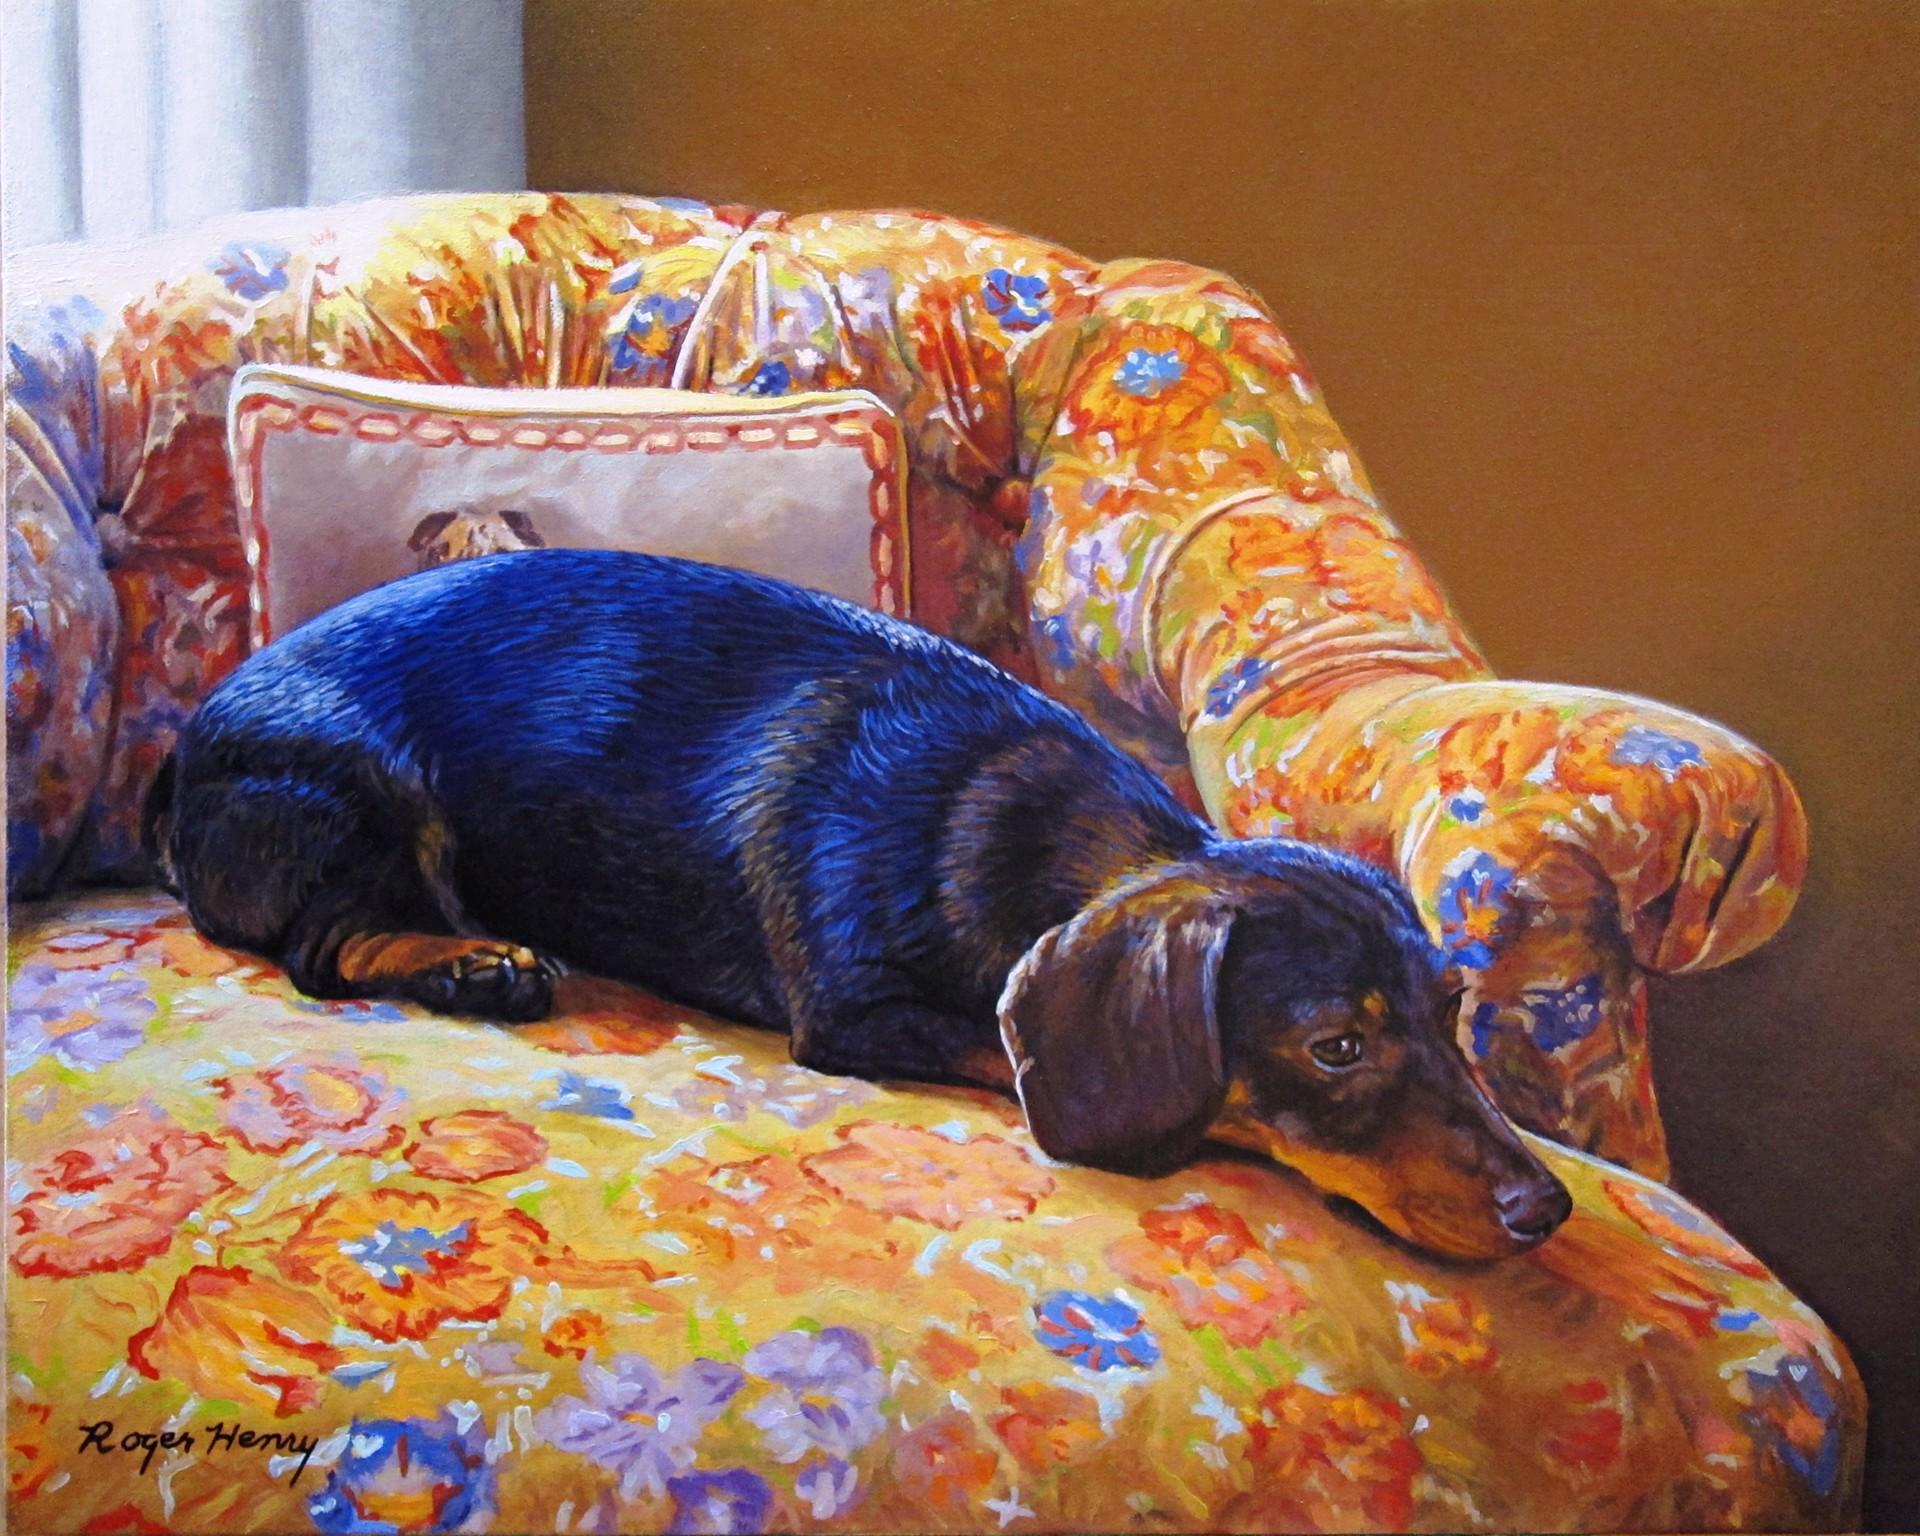 Vivid Dachshund realist painting on blue and yellow chair by animal portraitist